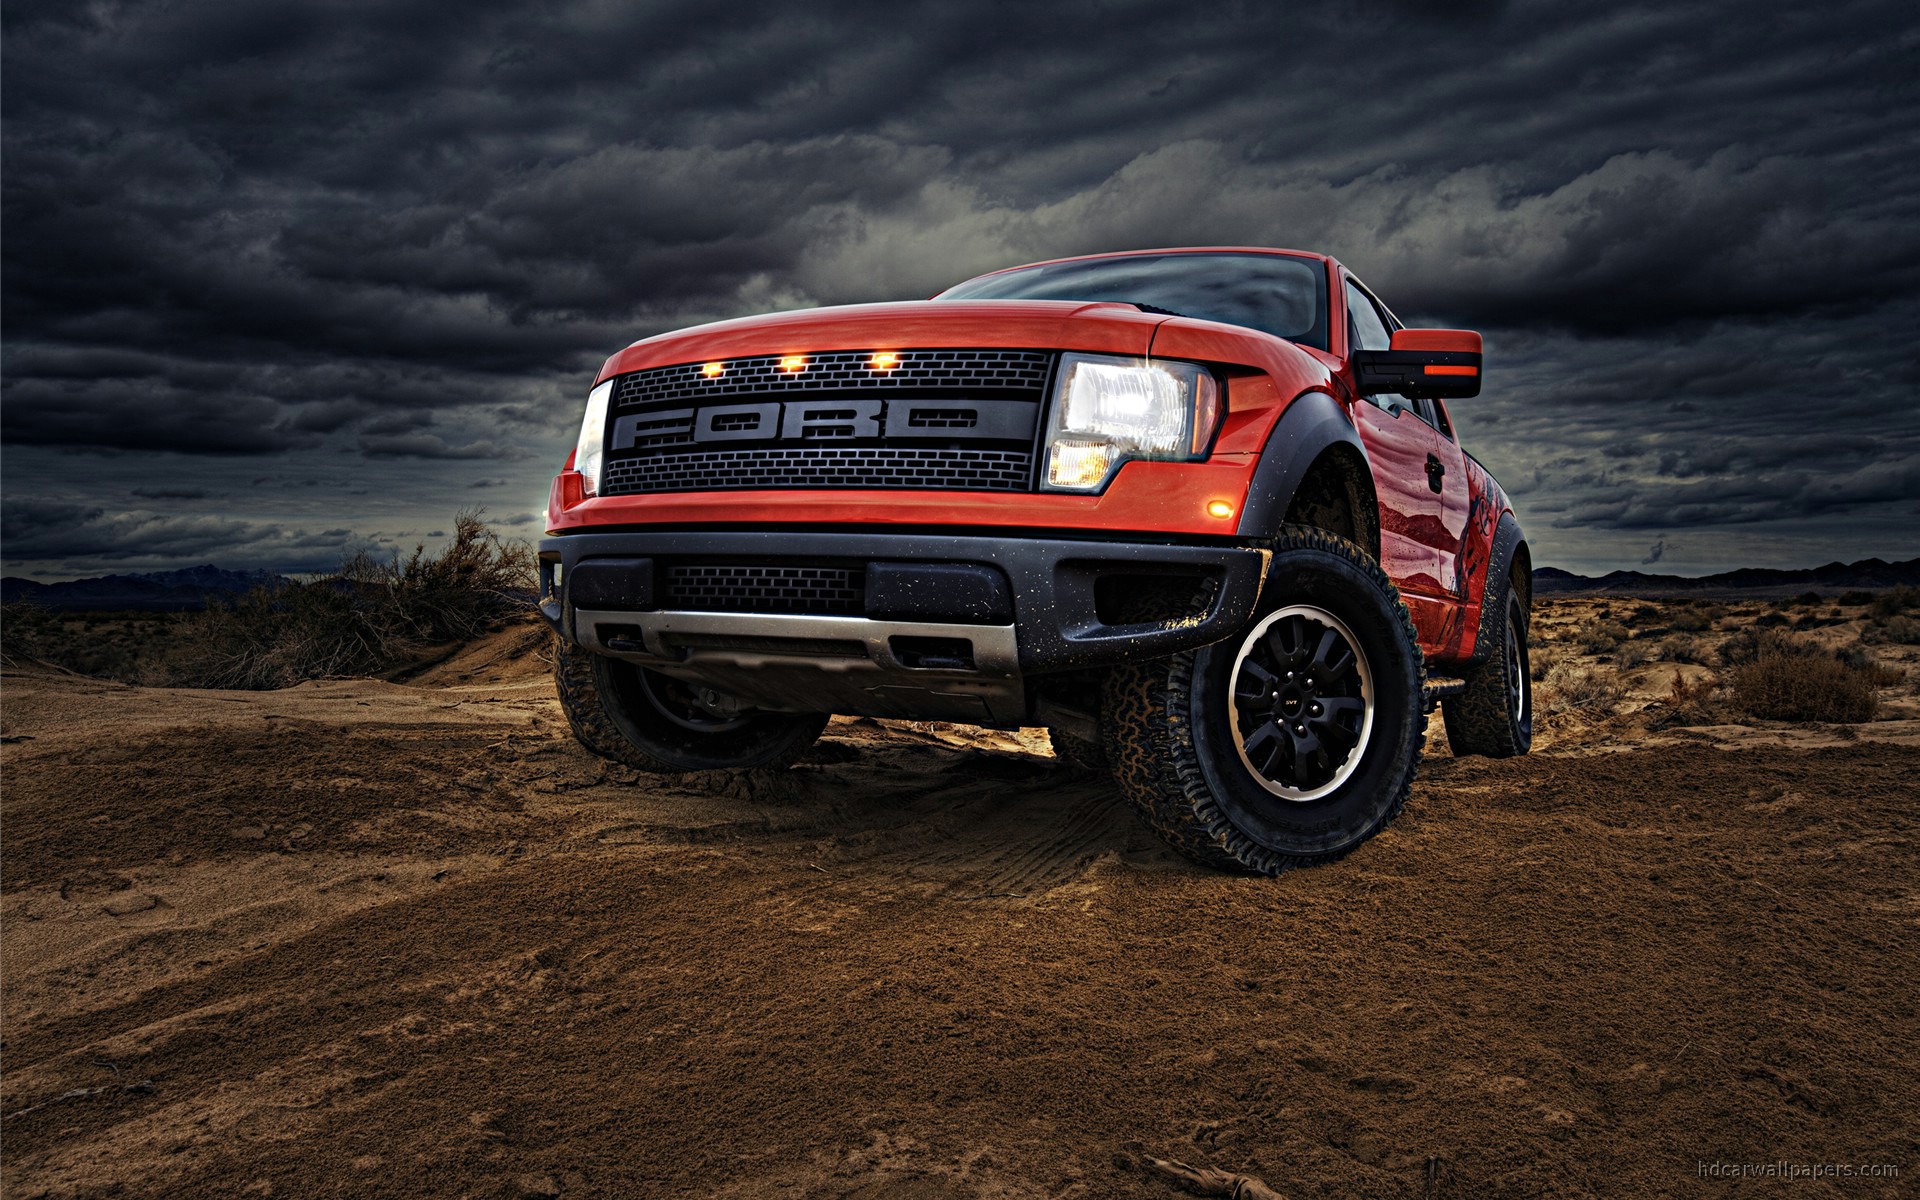 2010 Ford F150 SVT Raptor Wallpaper | HD Car Wallpapers | ID #618 2012 Ford F150 3.5 Ecoboost Towing Capacity